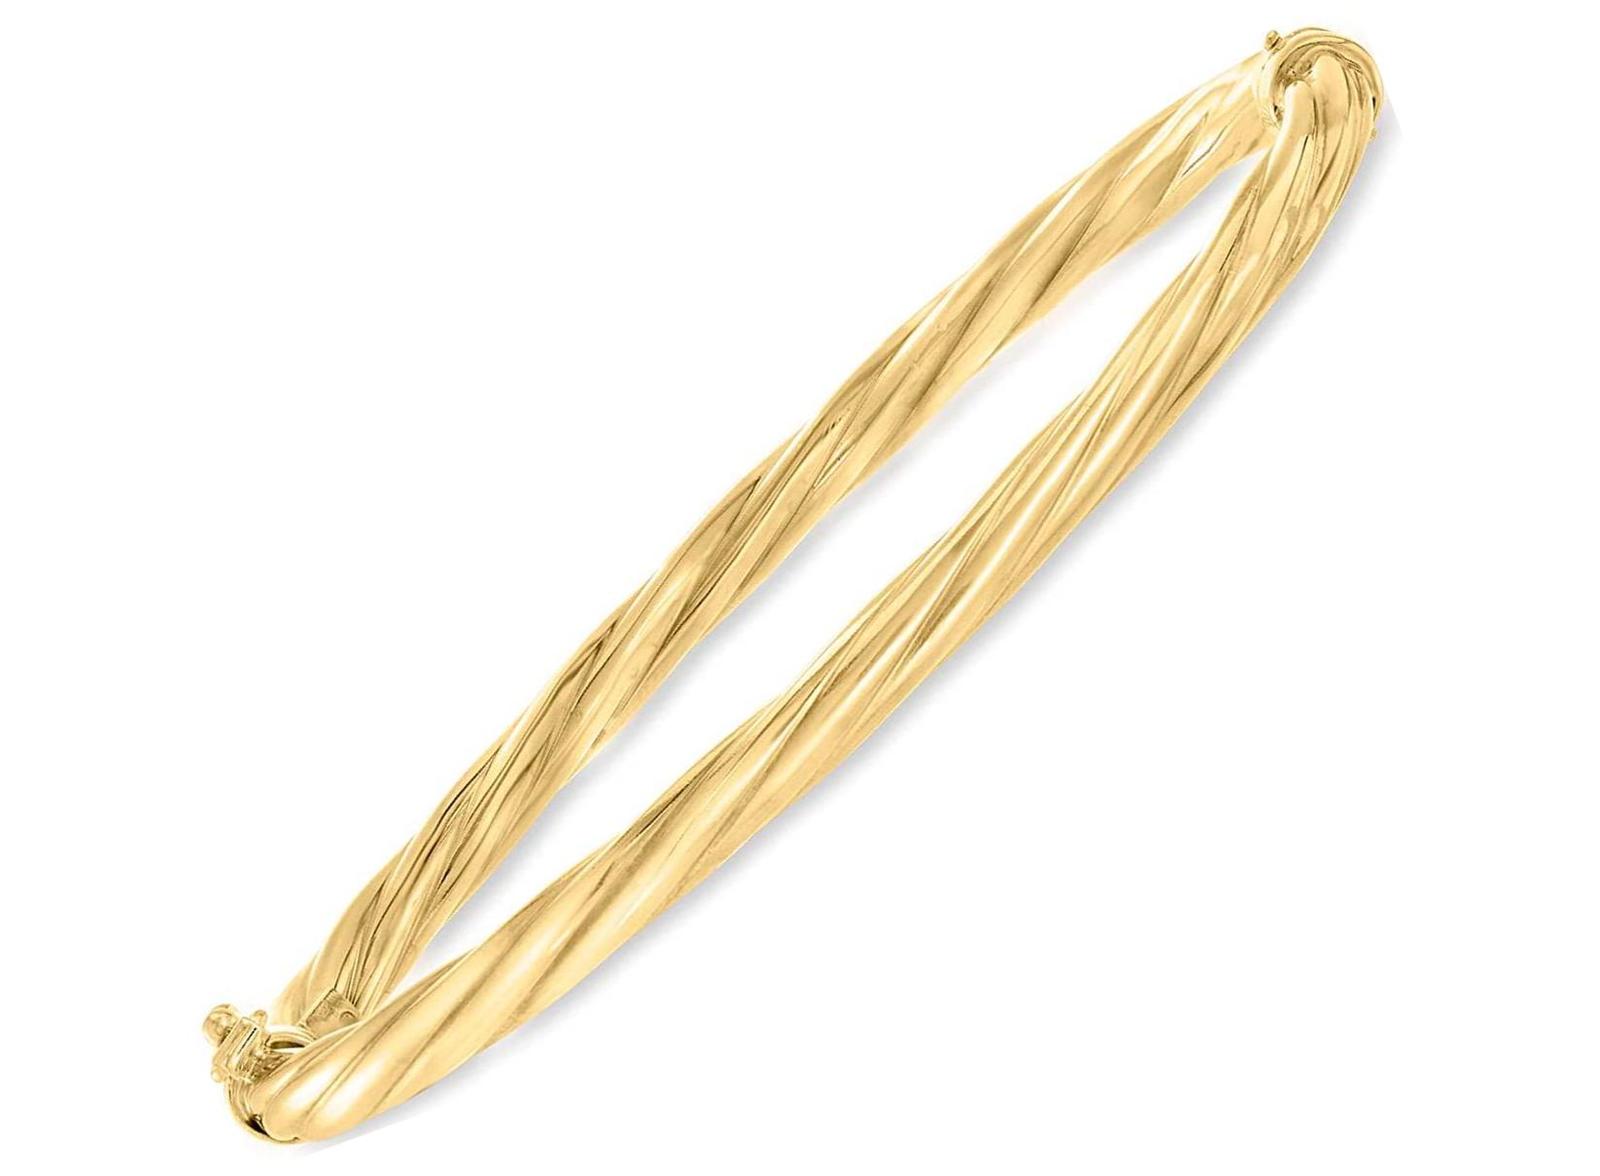 Primary image for Italian 18kt Gold Over Sterling Twisted Bangle